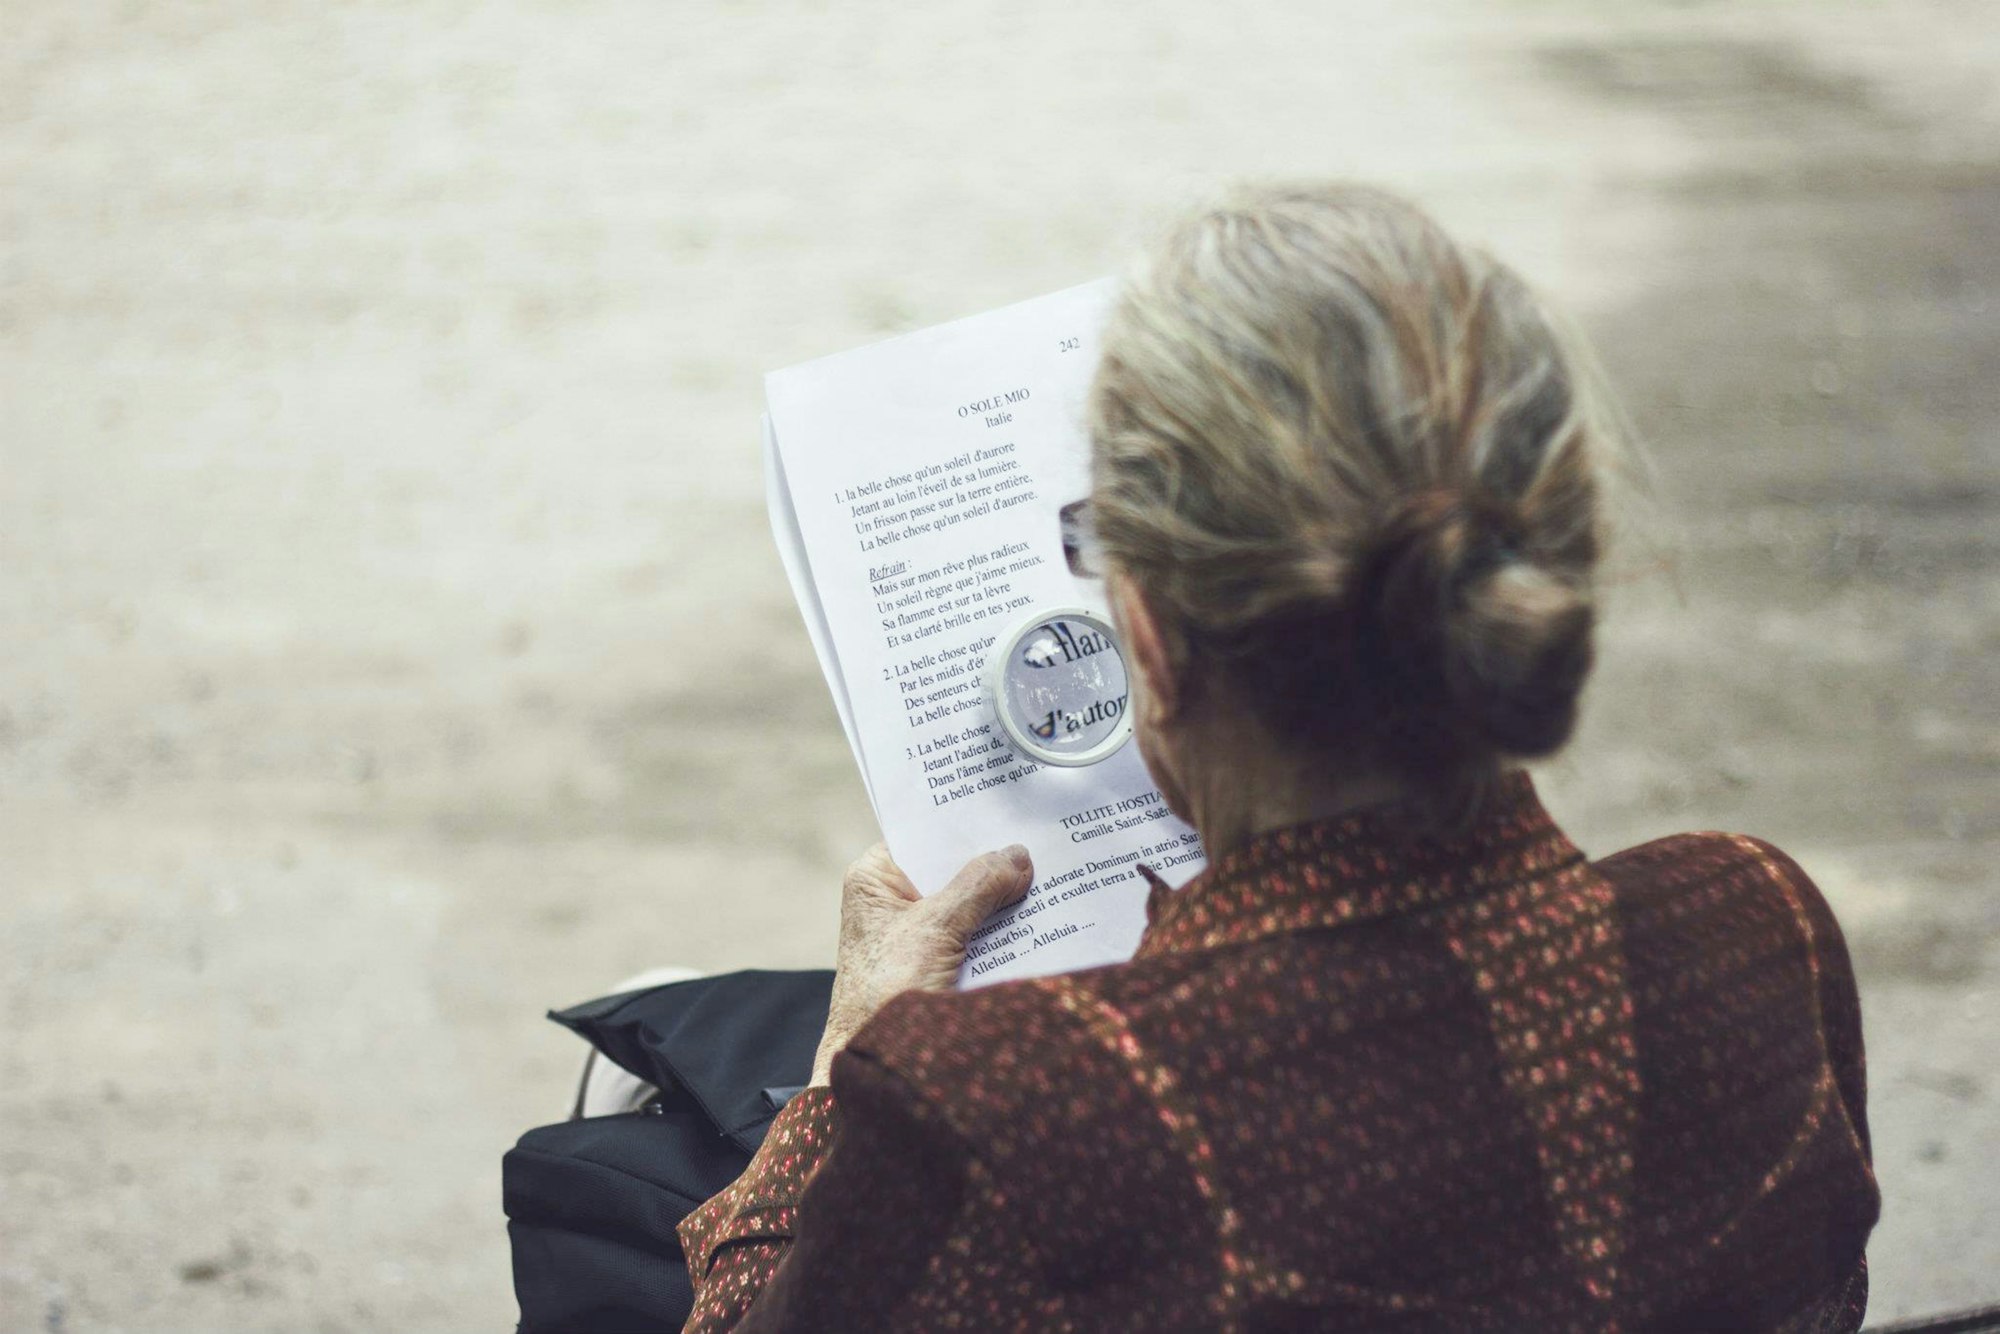 An elderly woman reading with a magnifying glass